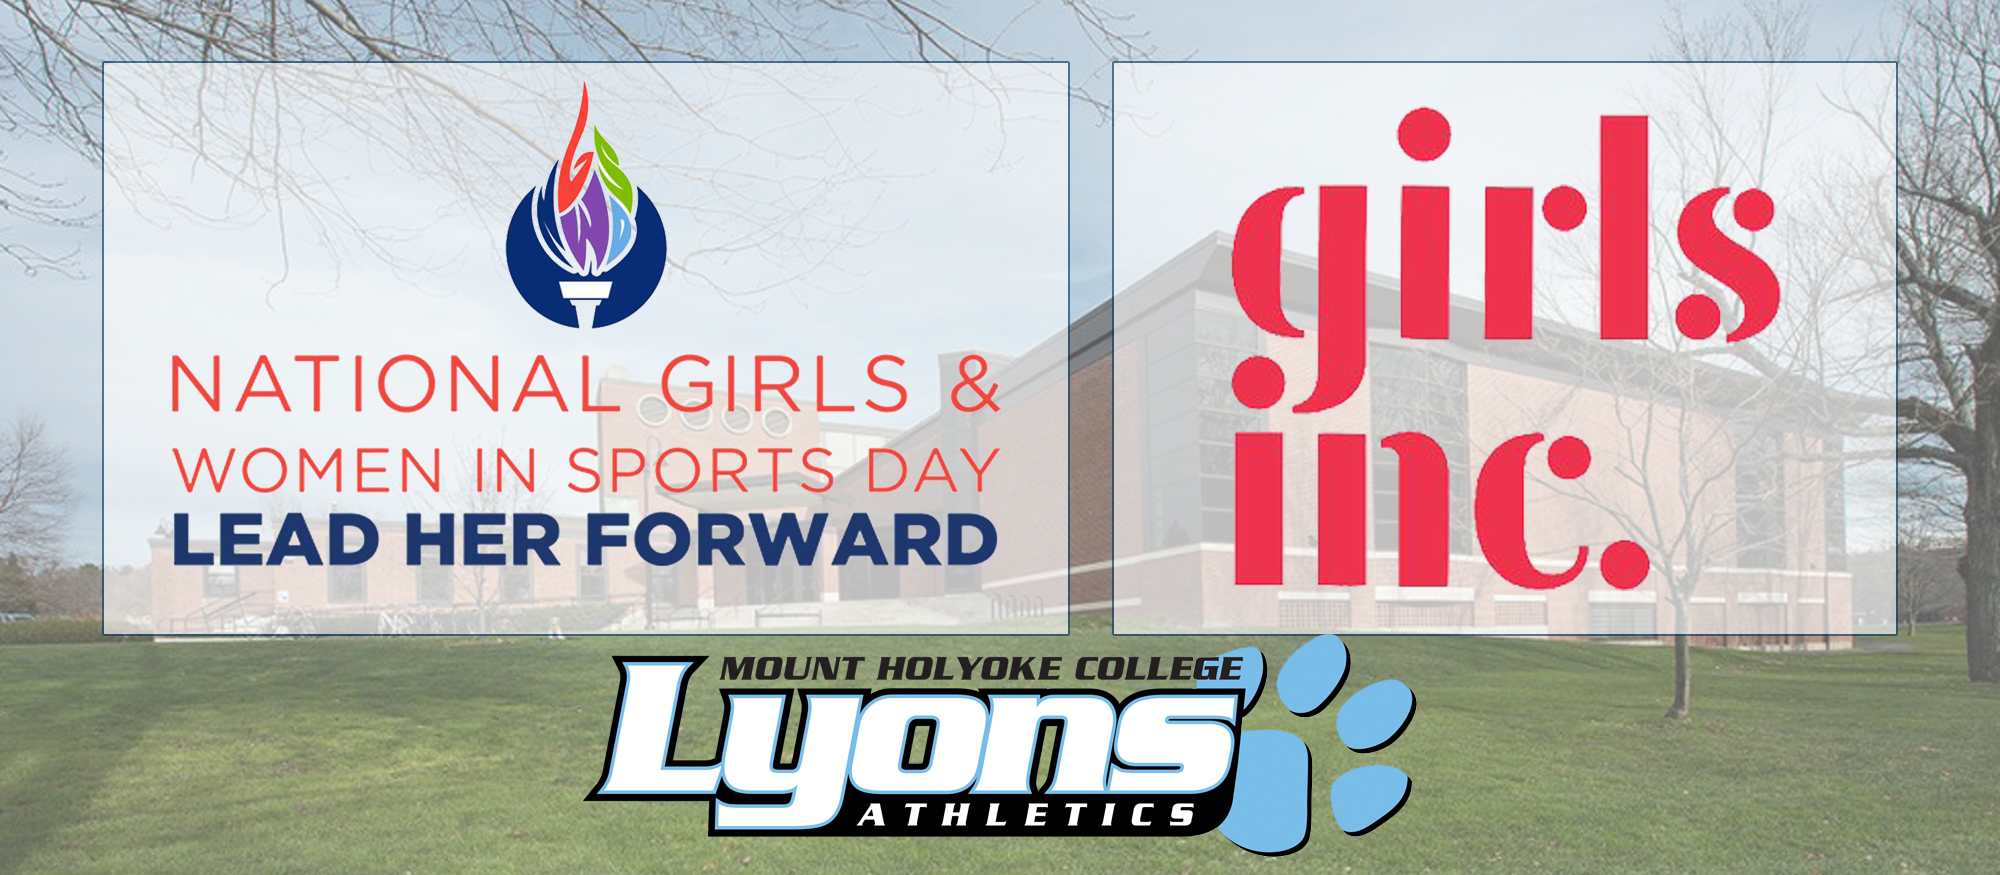 Mount Holyoke College to Celebrate National Girls and Women in Sports Day on February 8